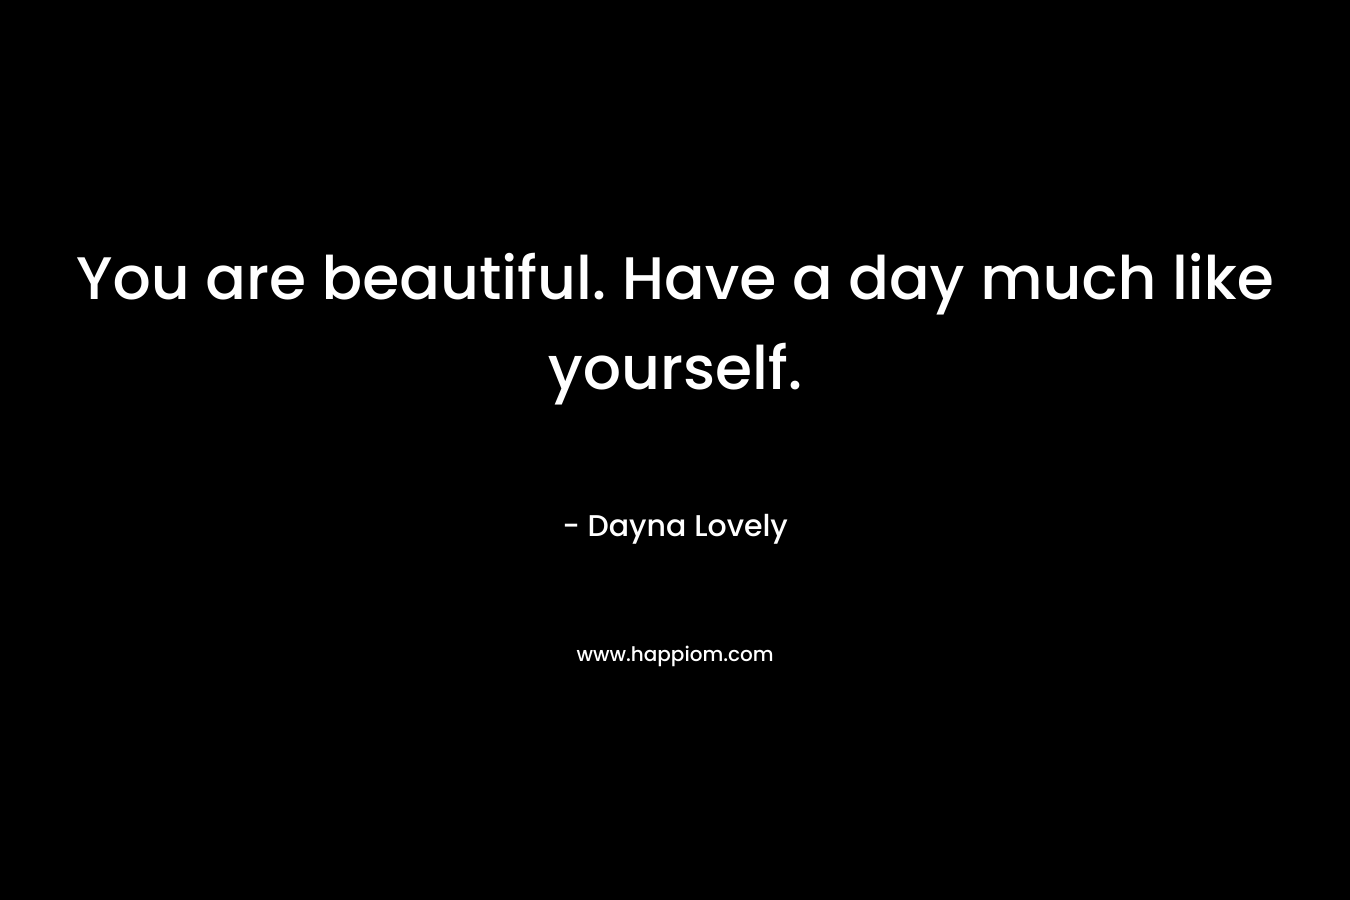 You are beautiful. Have a day much like yourself. – Dayna Lovely